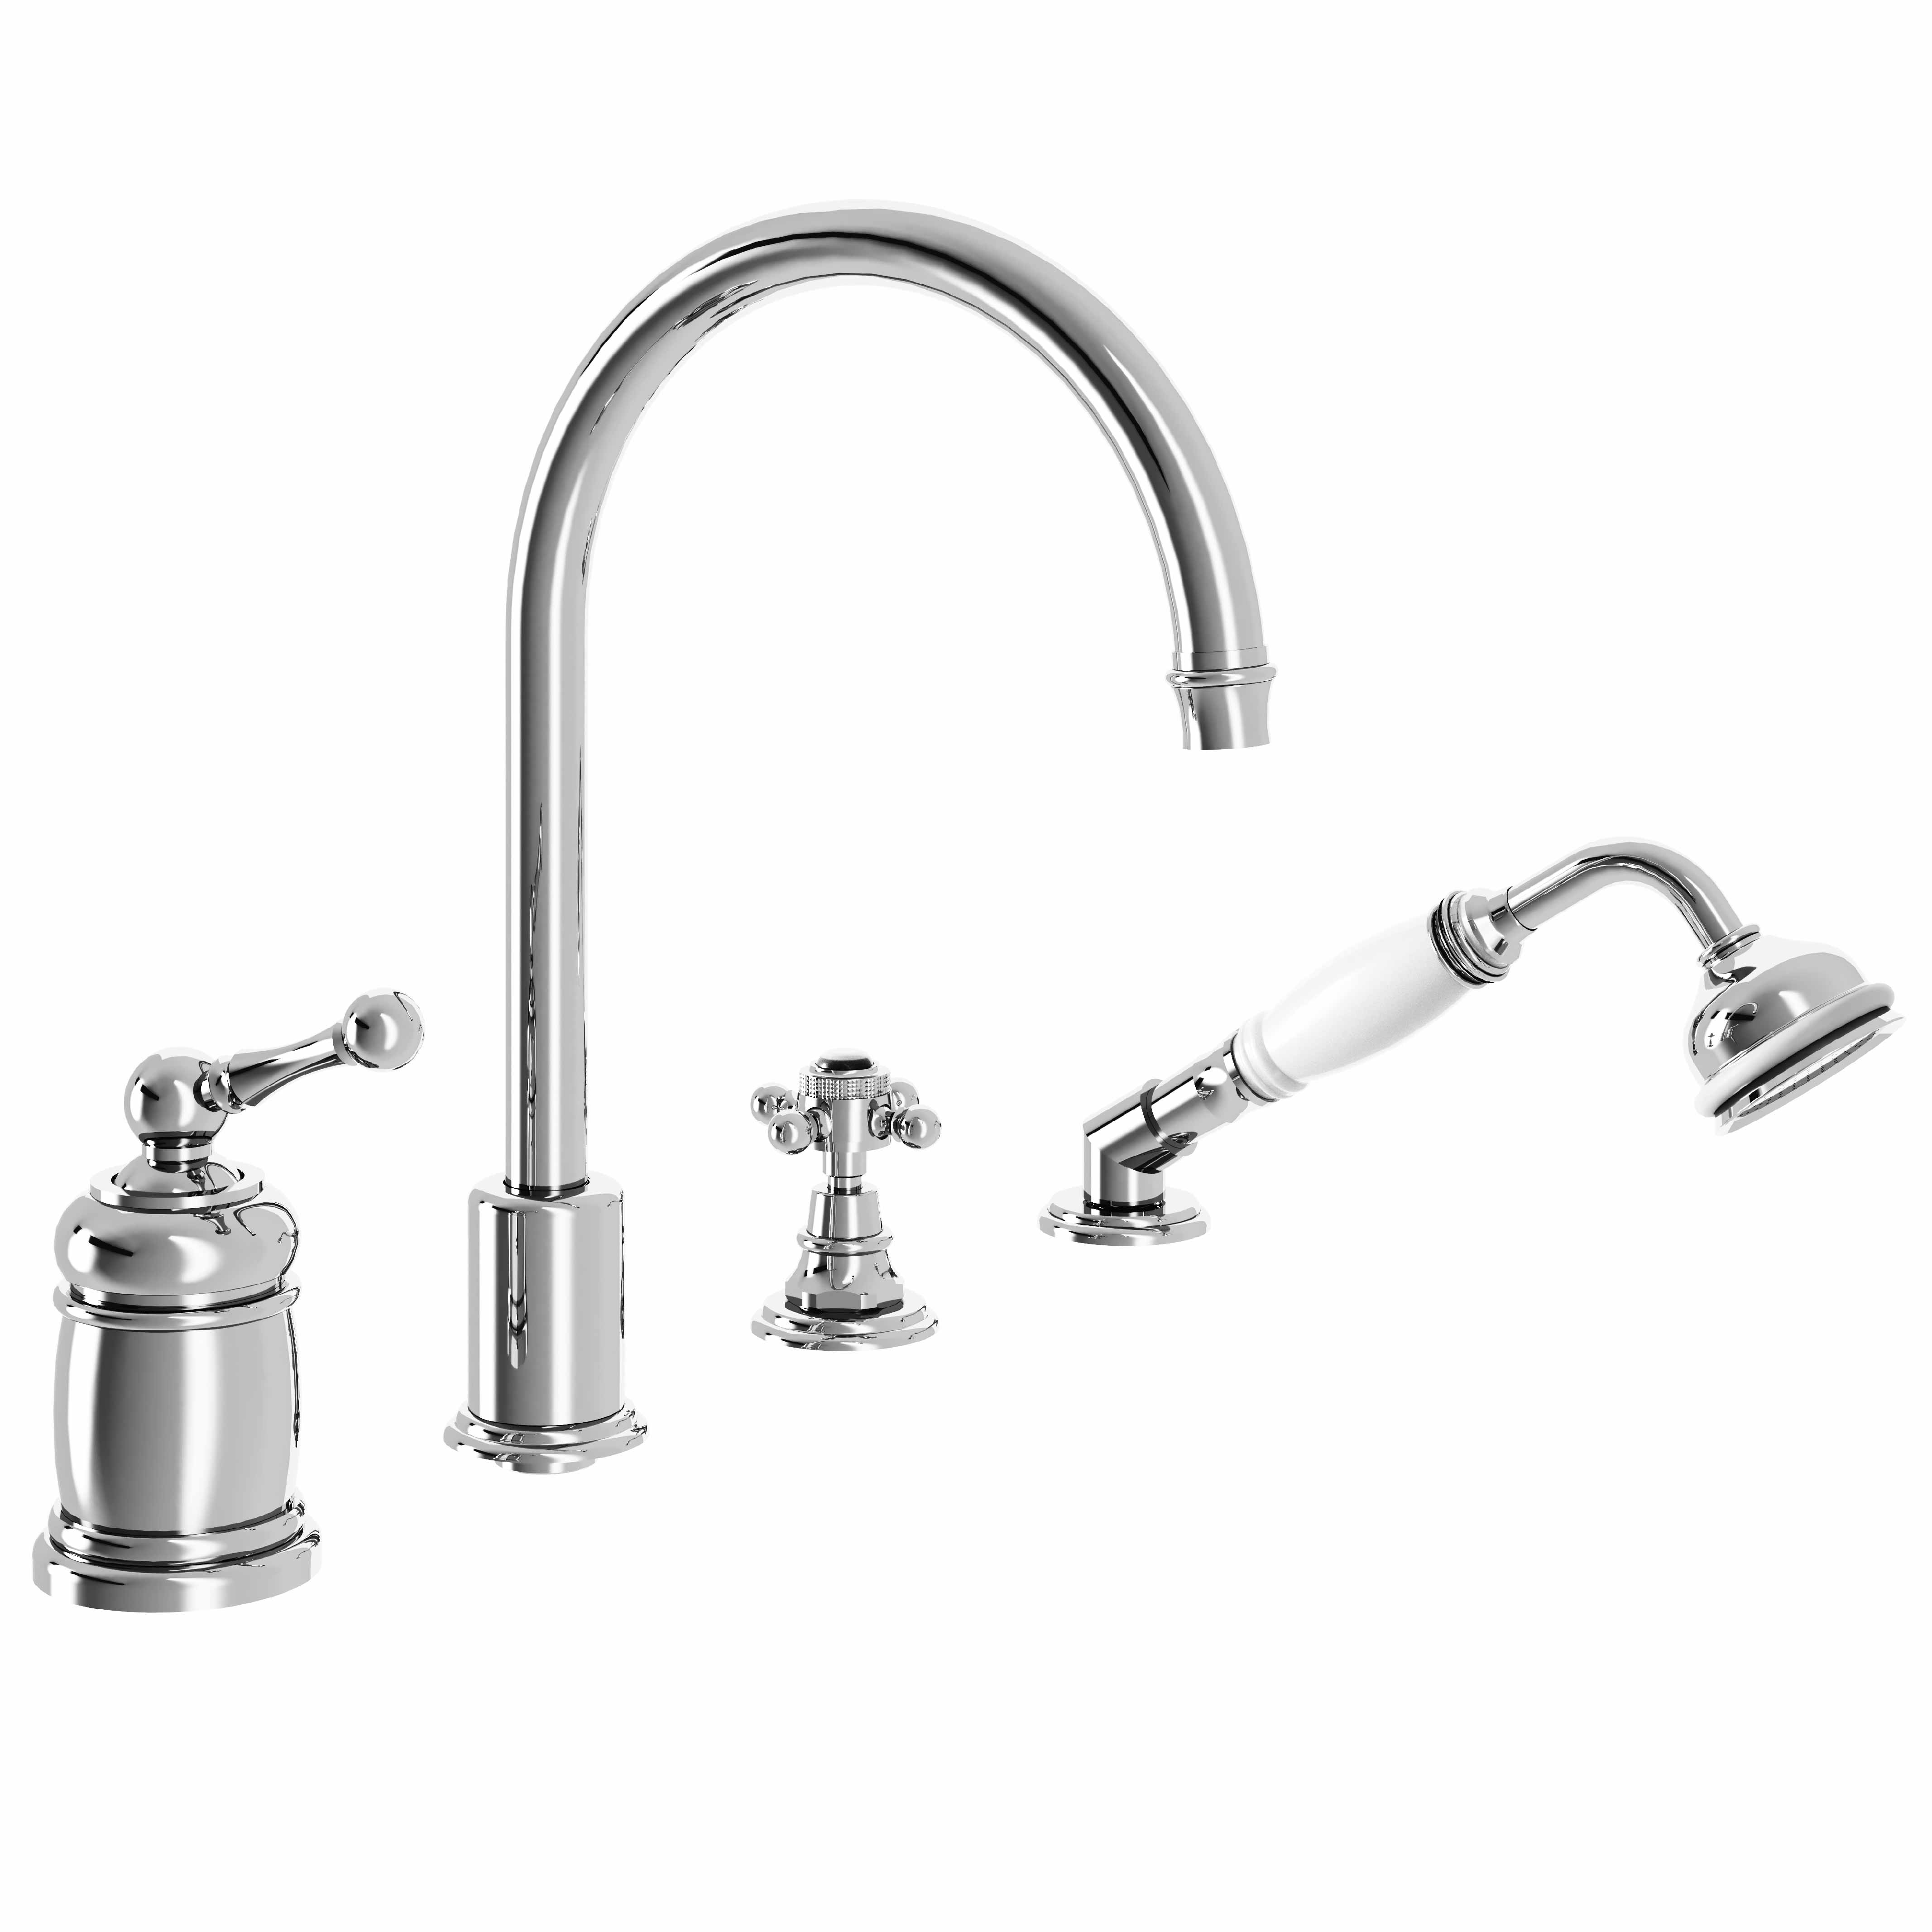 M20-3304M 4-hole single-lever bath and shower mixer